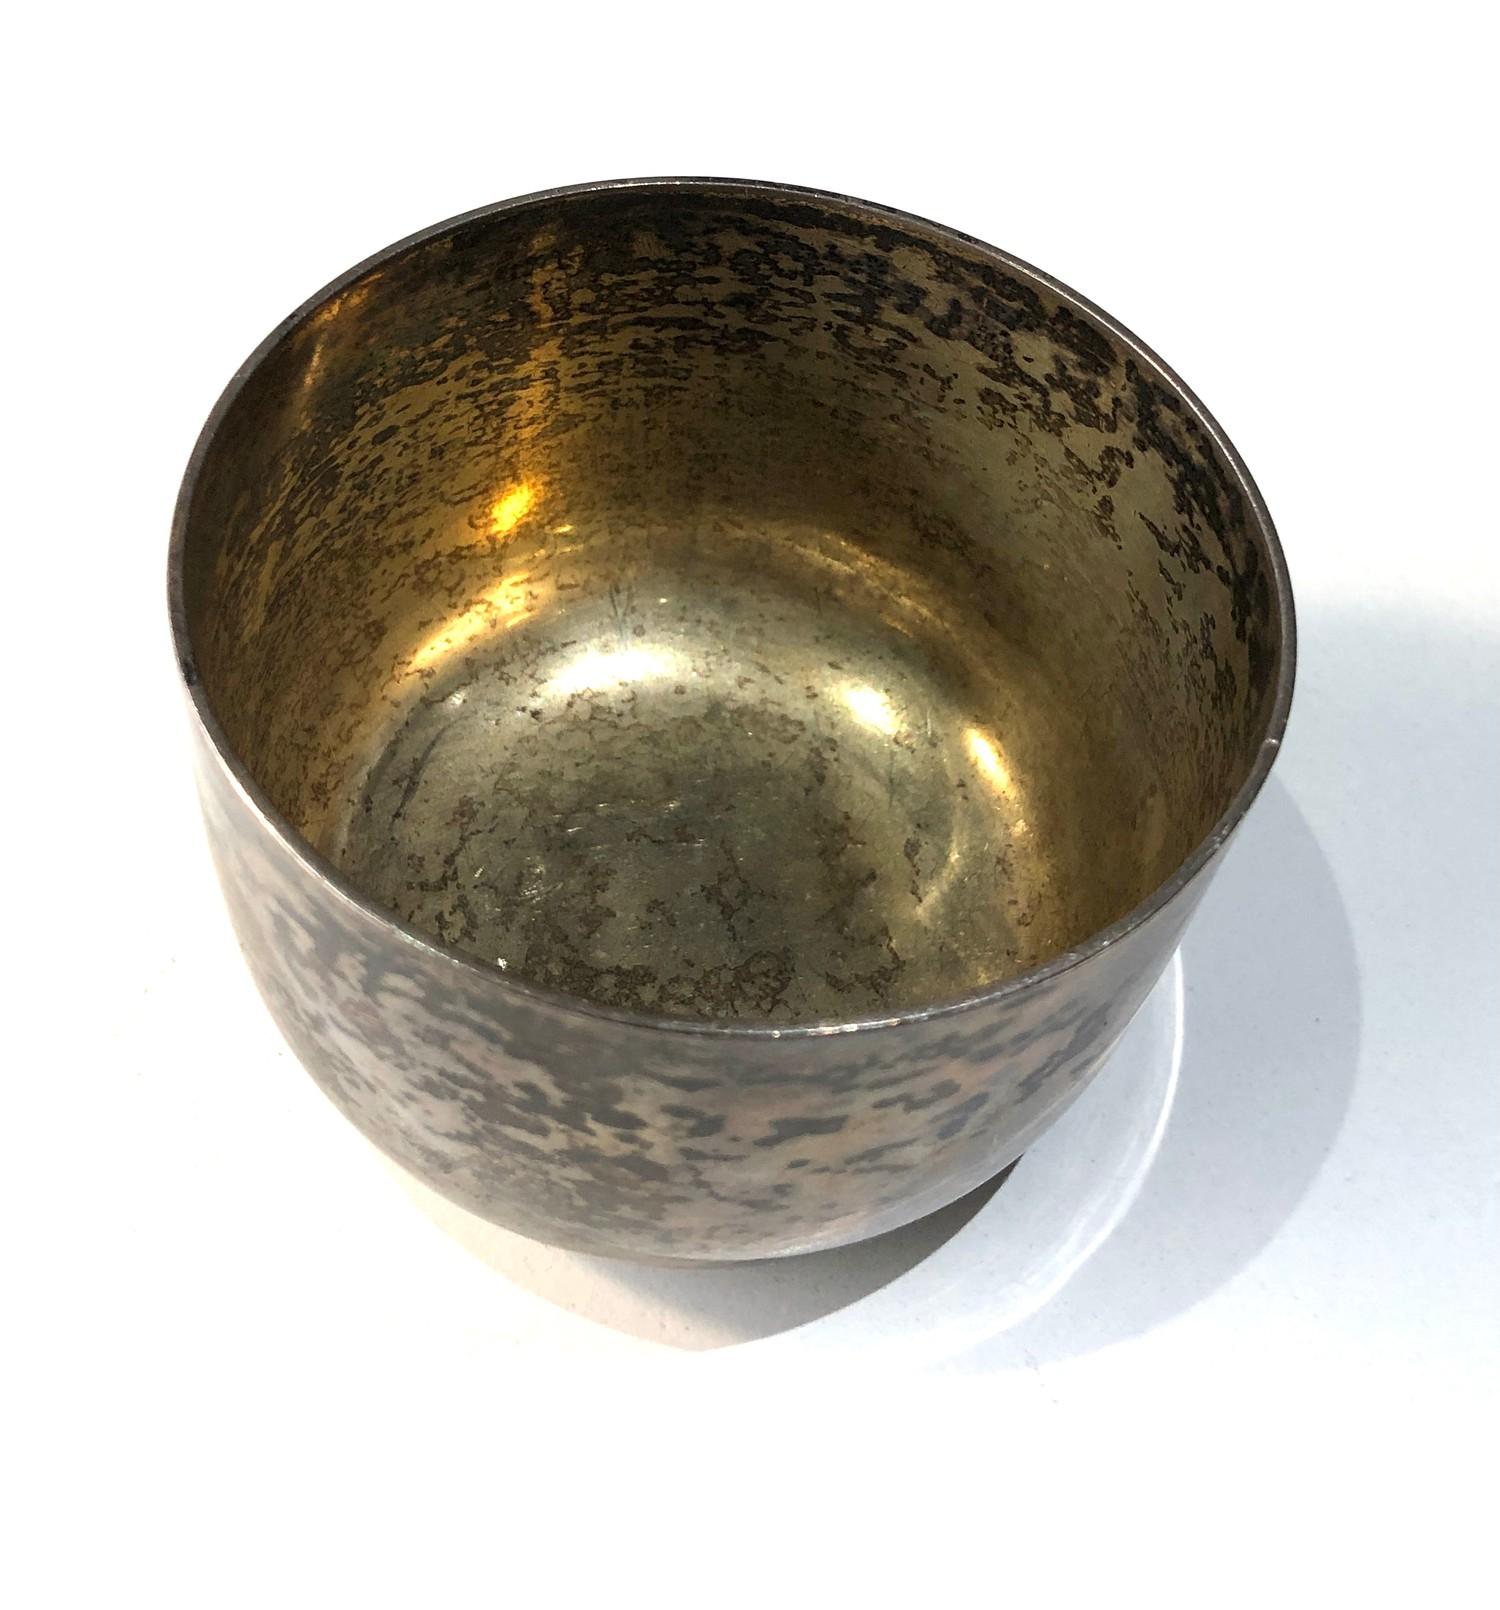 Victorian silver bowl london silver hallmarks measures approx 7.5cm dia by height 5cm weight 116g - Image 2 of 5